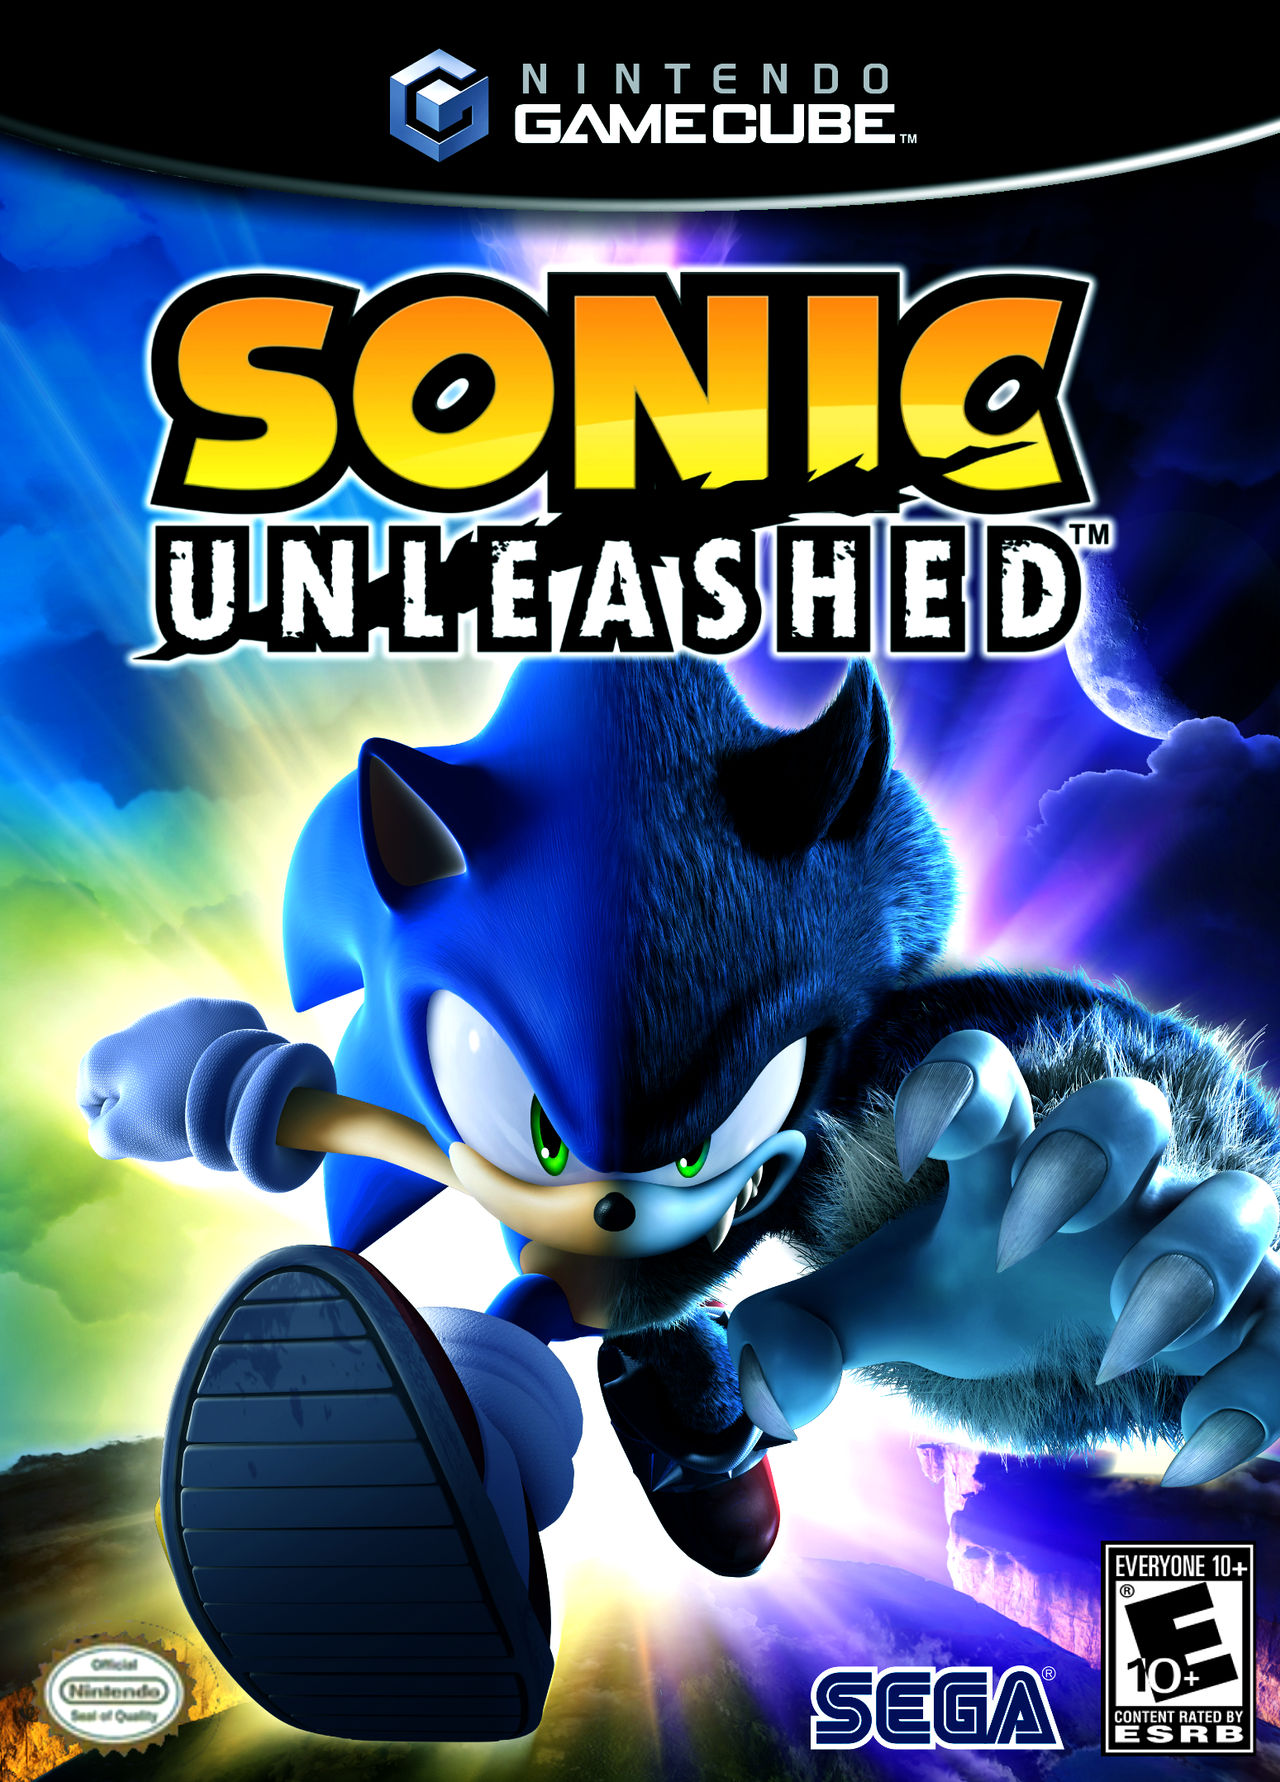 Sonic Unleashed Nintendo GameCube (2008) by SonicLoud1213 on DeviantArt